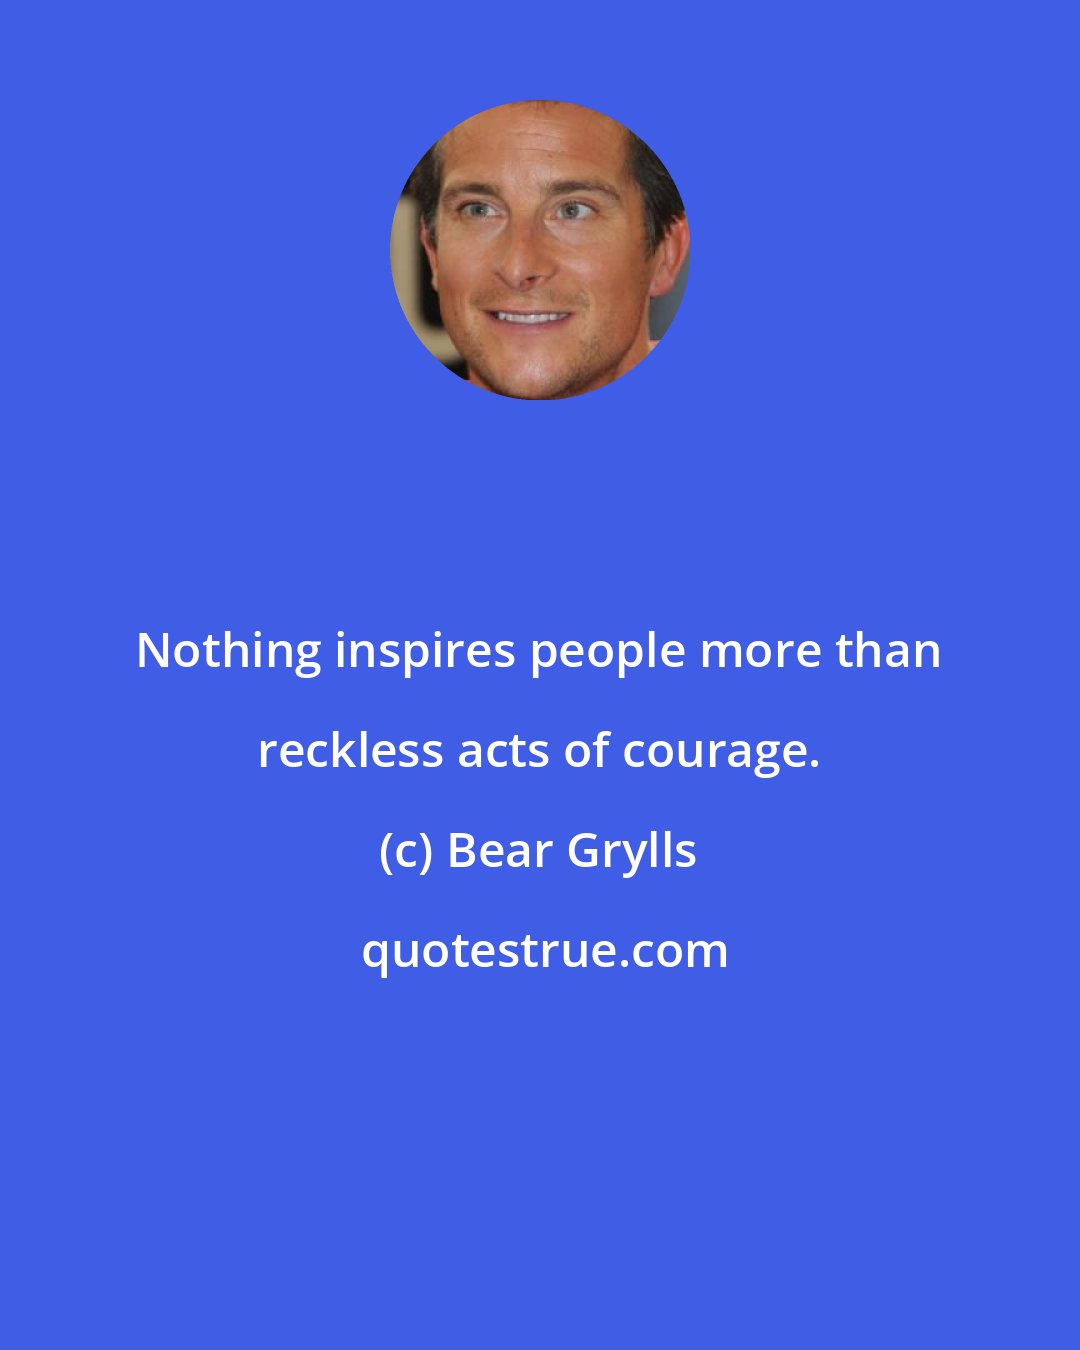 Bear Grylls: Nothing inspires people more than reckless acts of courage.